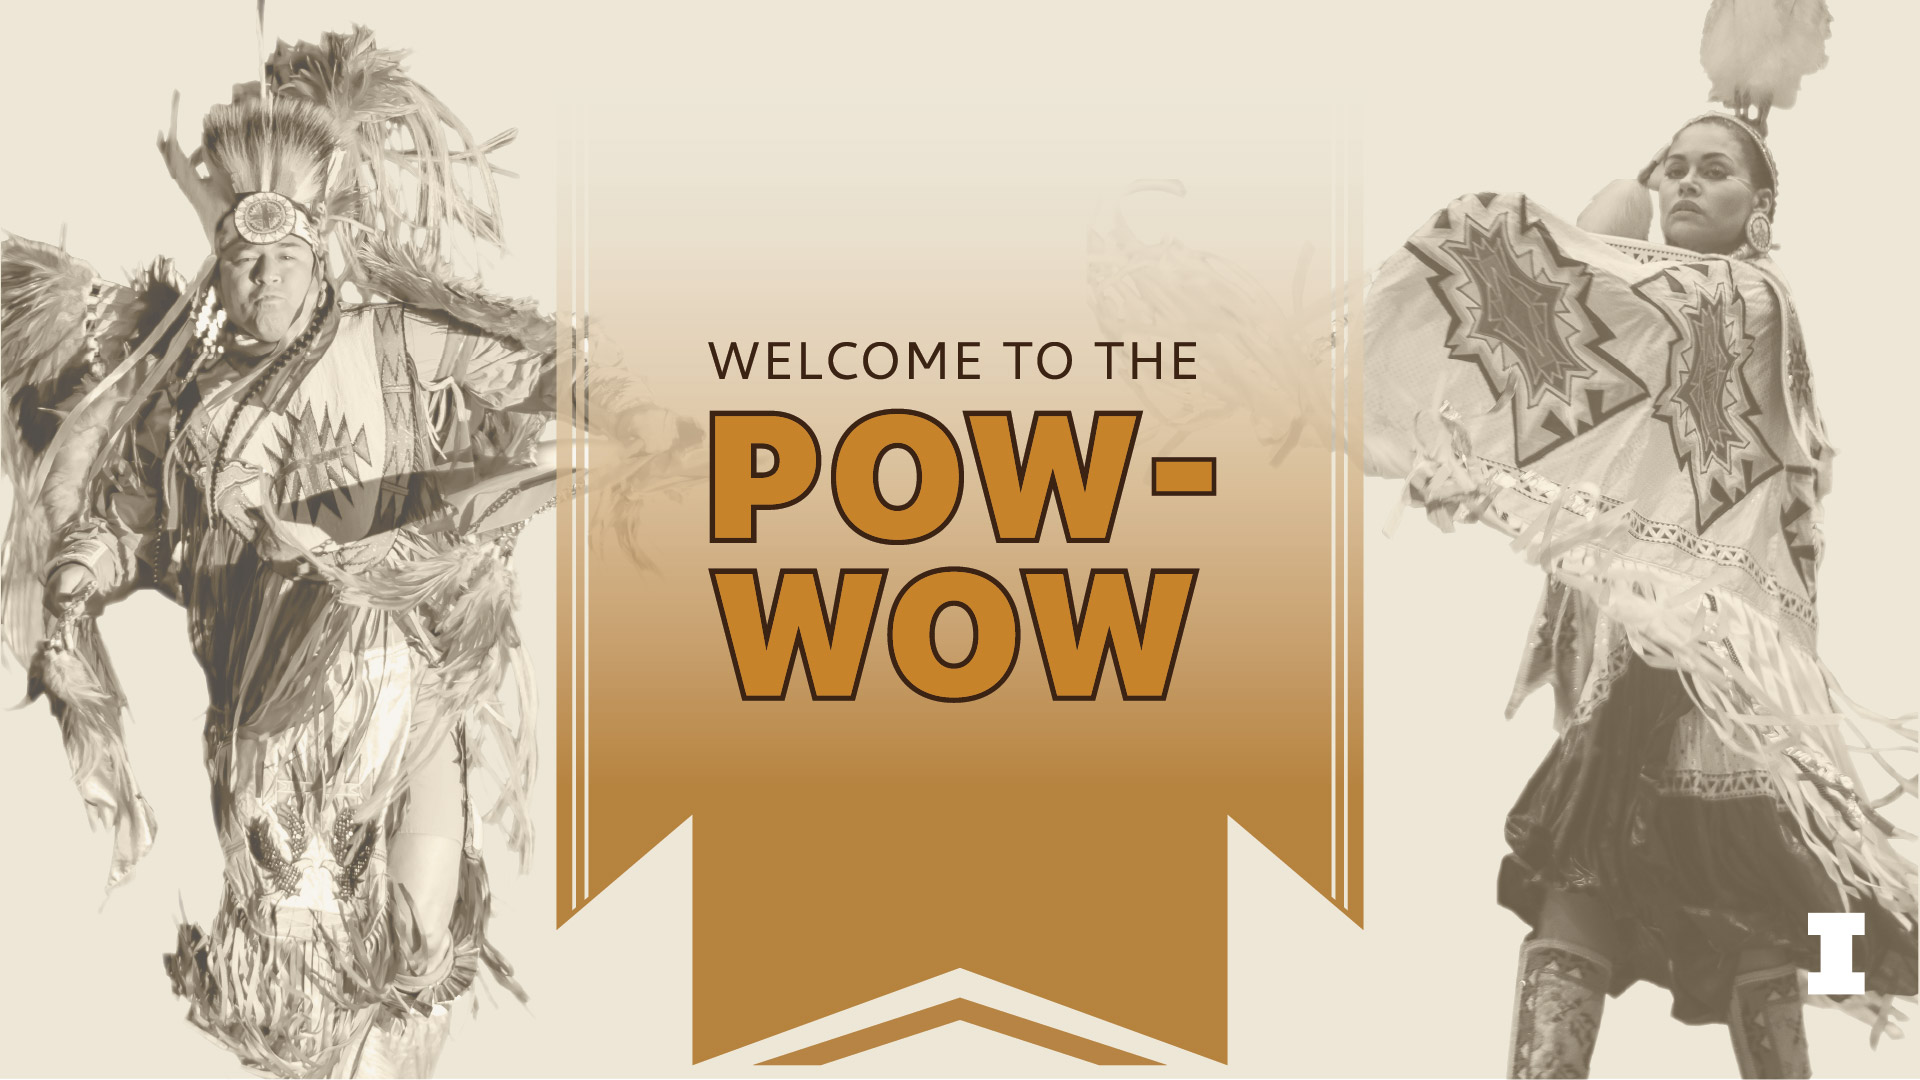 pictures of two Native Americans dancing on a beige background with text in the middle that reads: Welcome to the Pow-wow